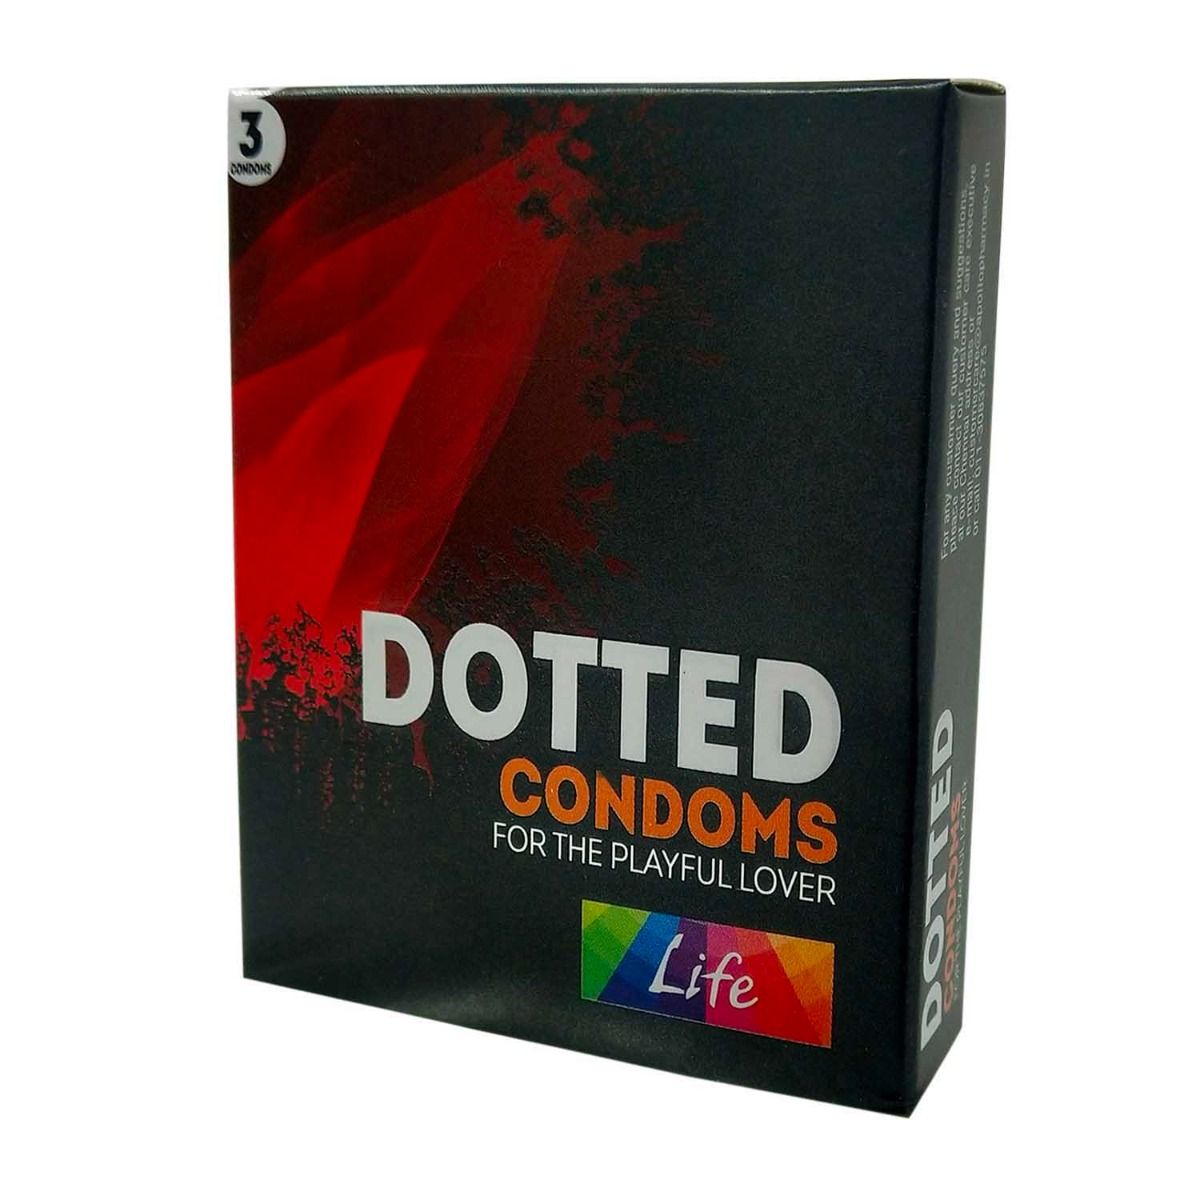 Buy Apollo Life Dotted Condoms, 3 Count Online